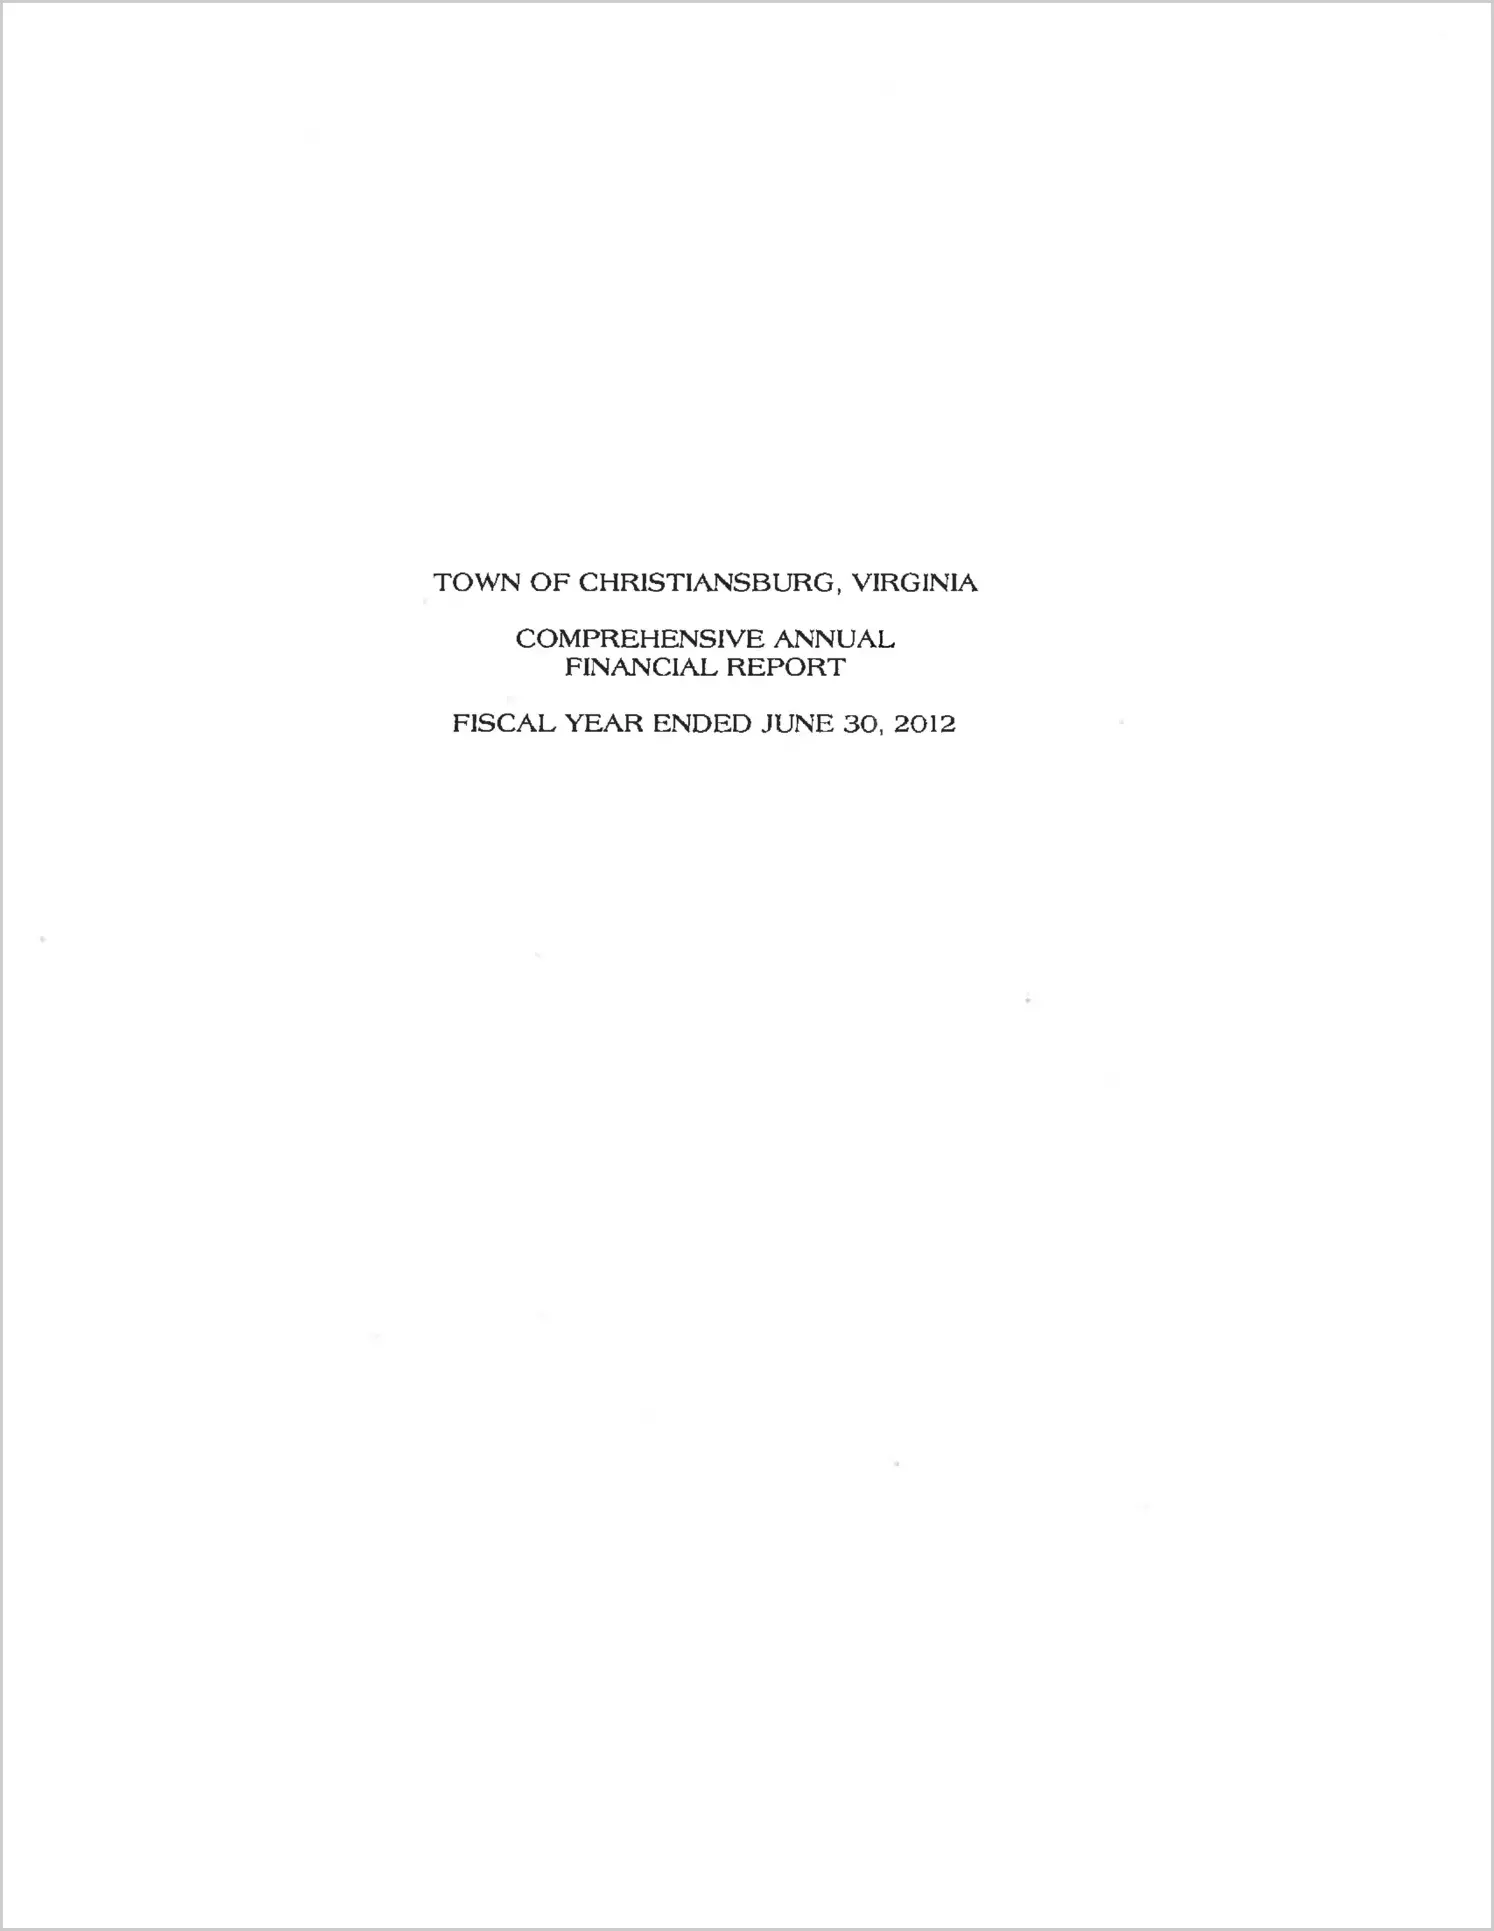 2012 Annual Financial Report for Town of Christiansburg